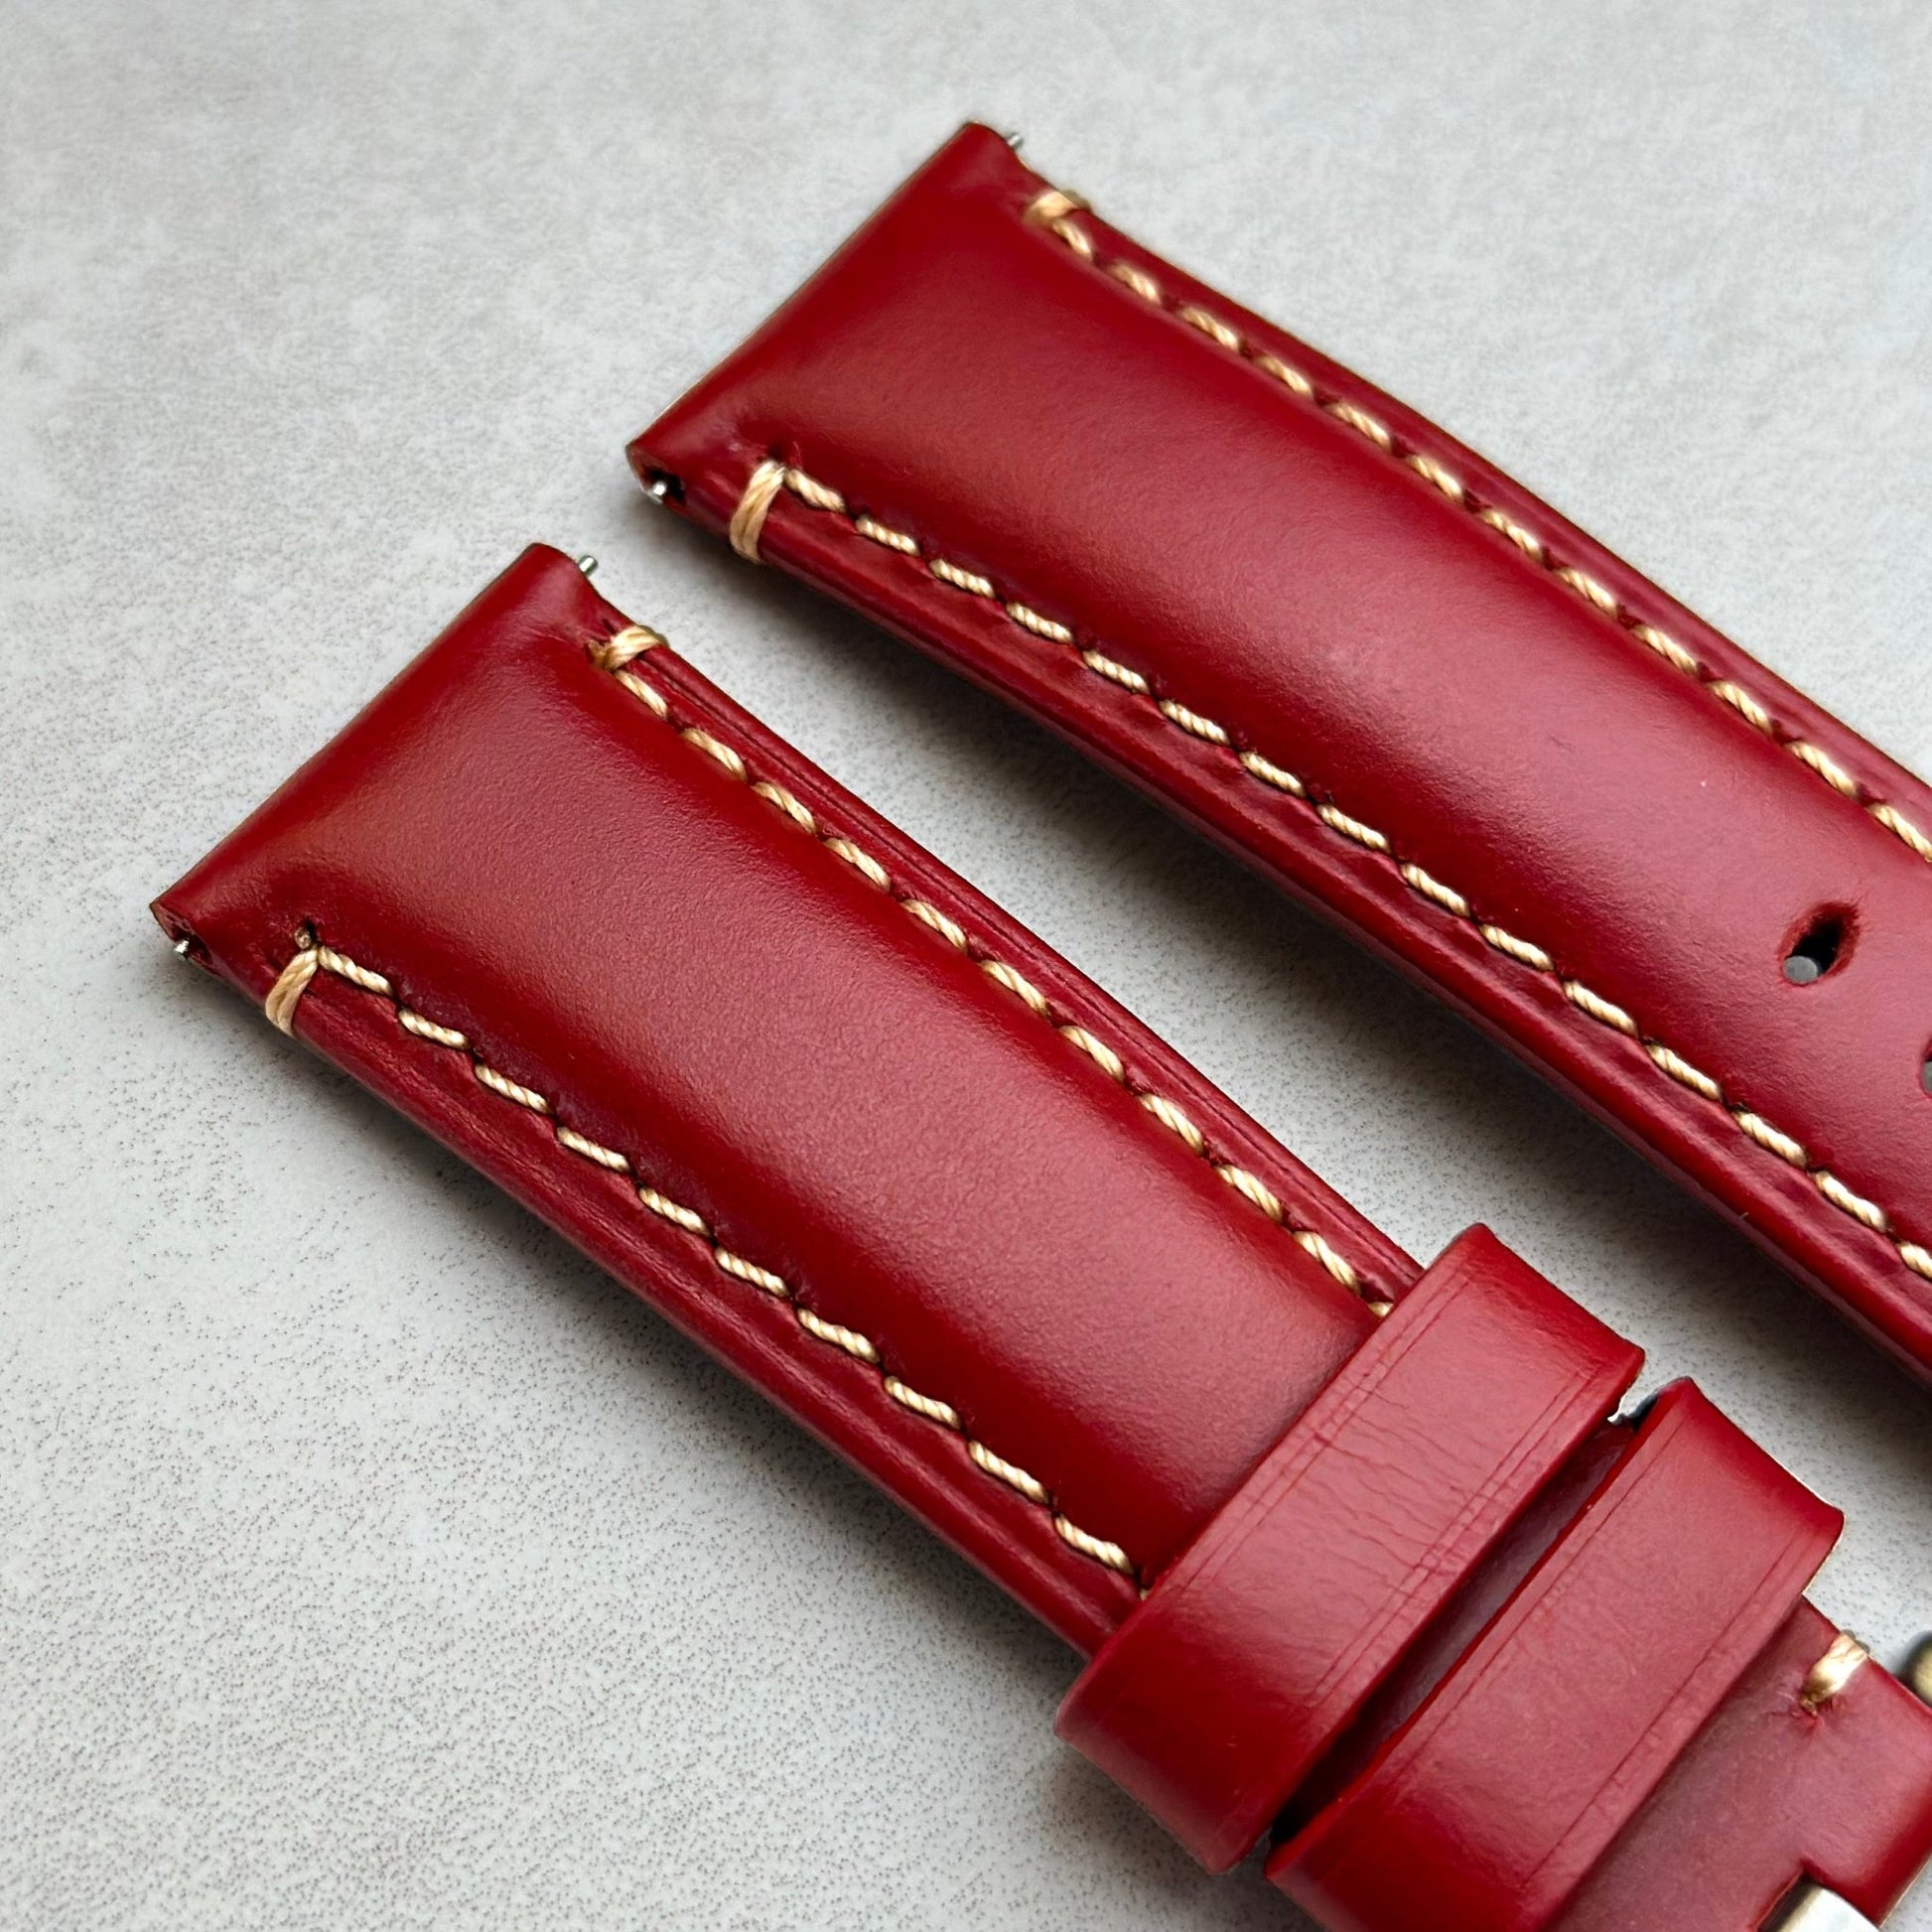 Oslo blood red full grain leather watch strap. Contrast ivory stitching. Padded leather strap.